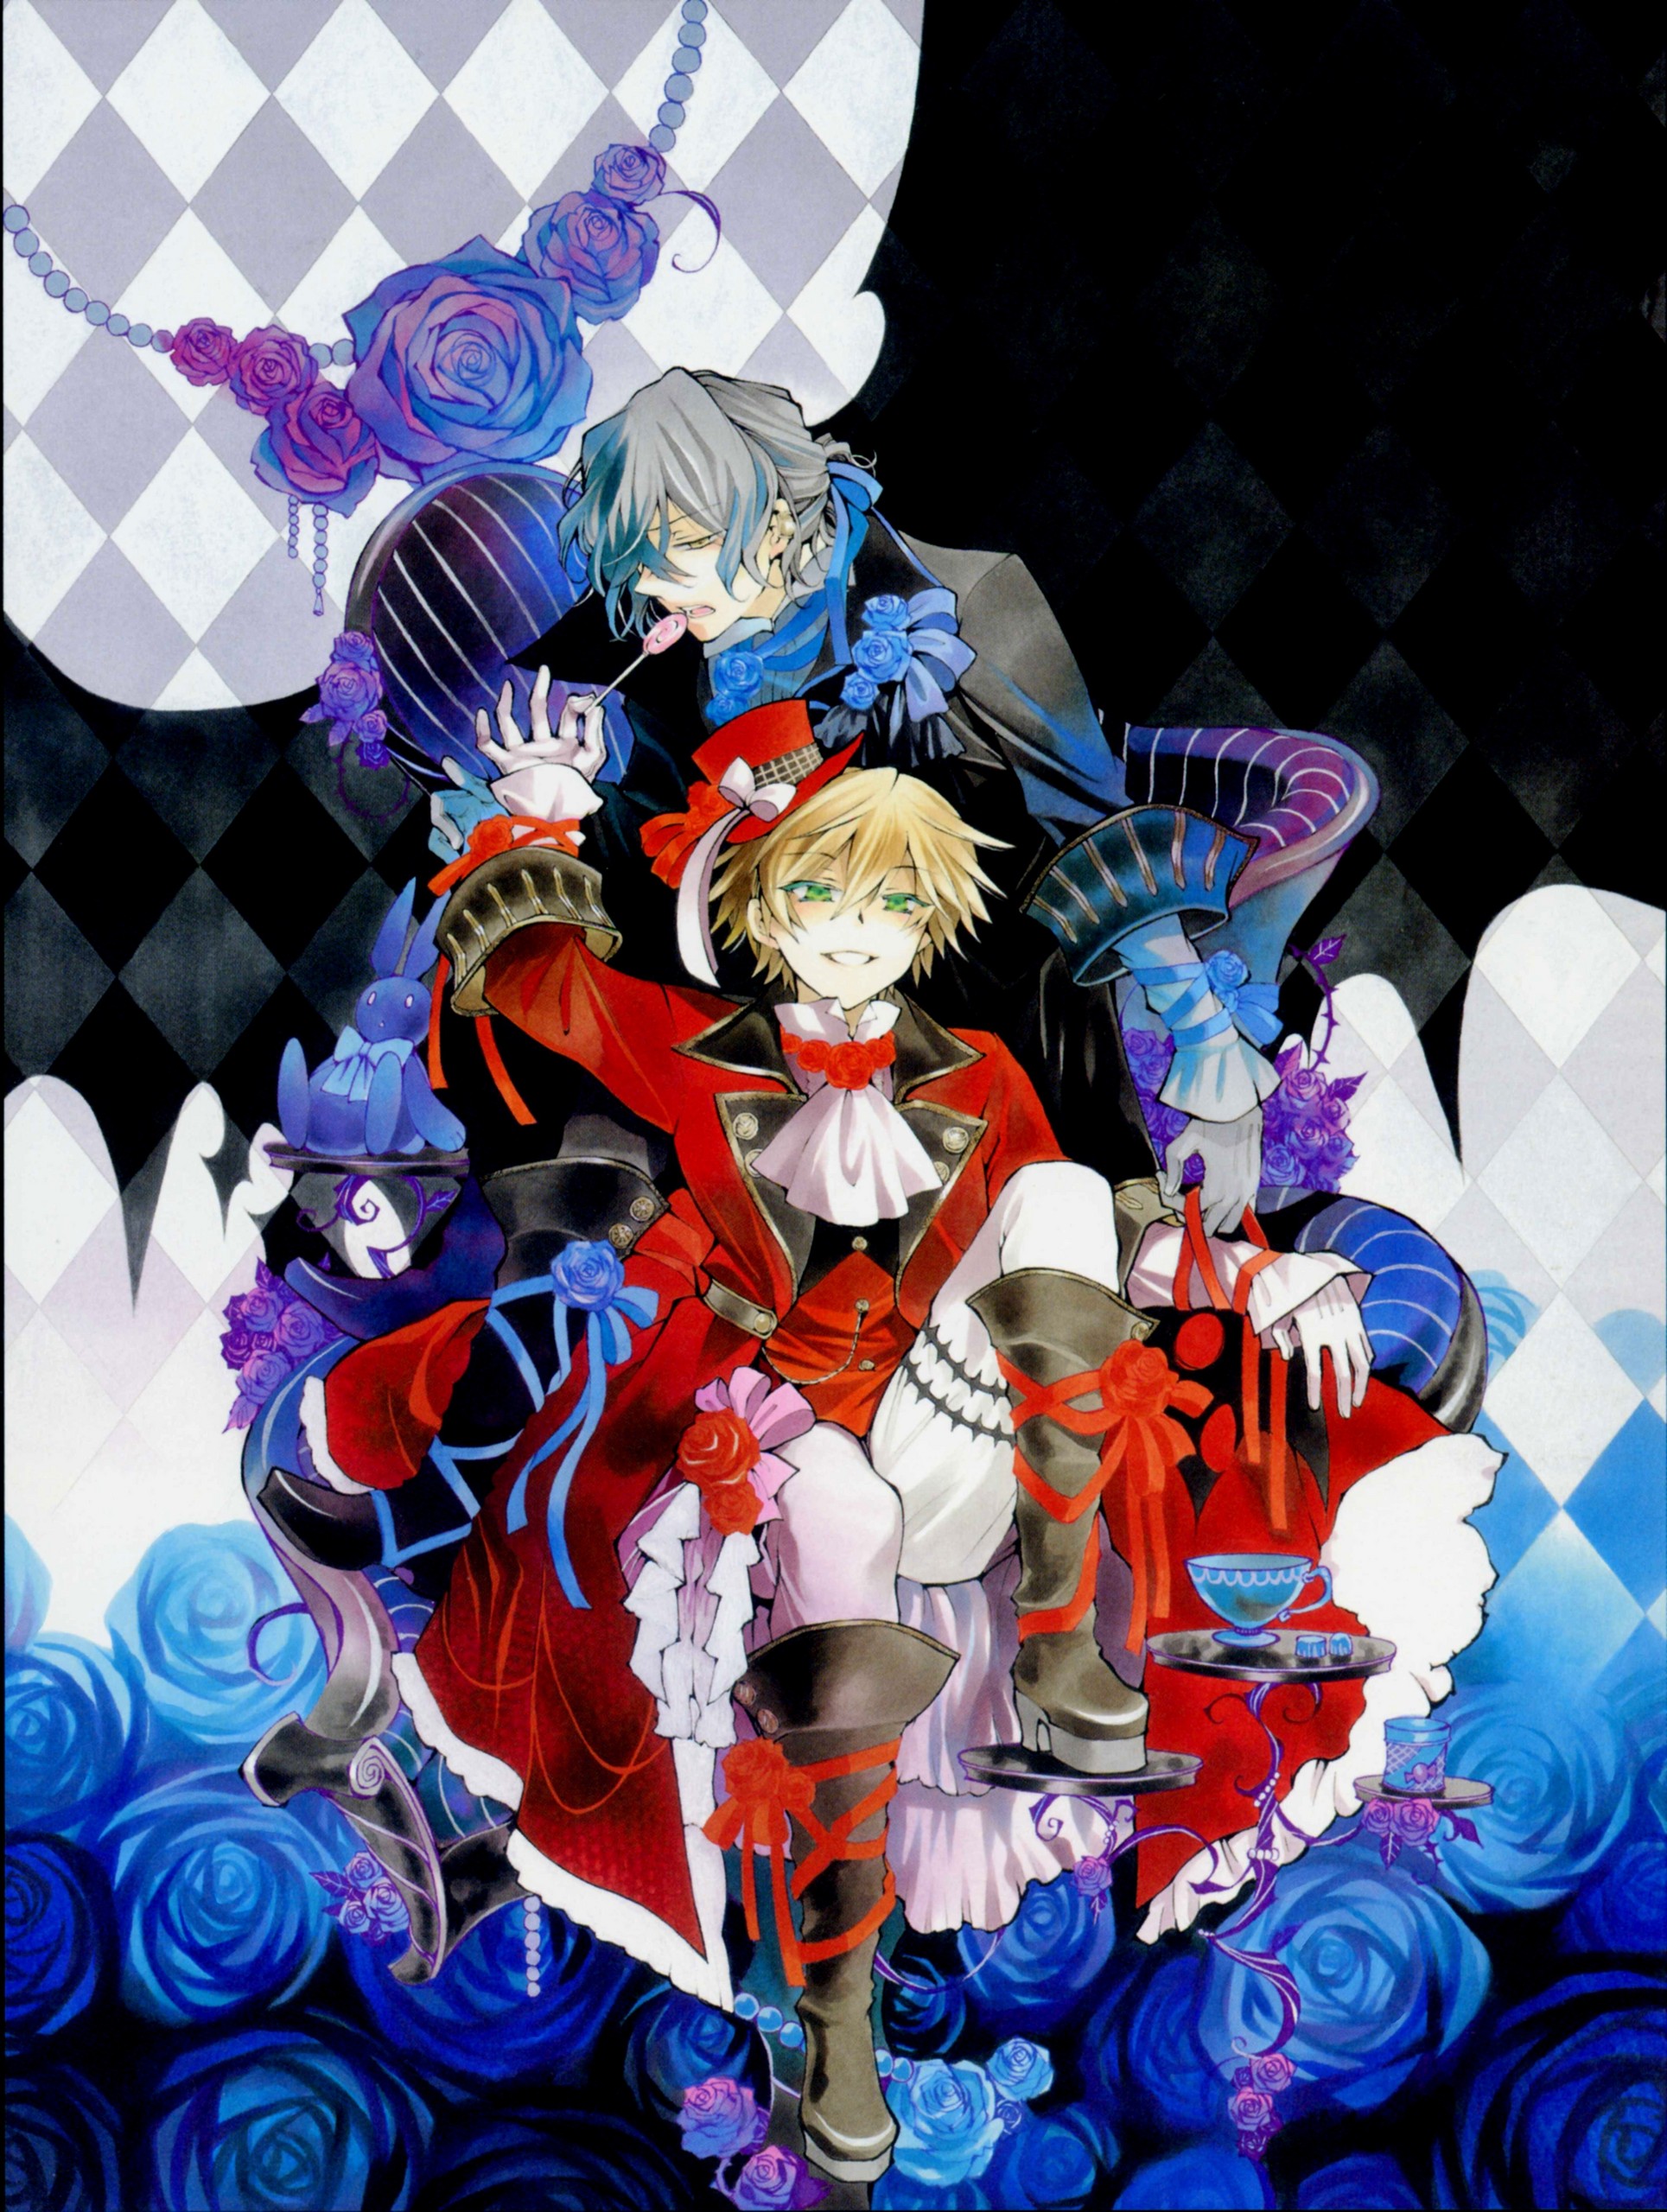 Top Wallpaper Pandora Hearts Hq Download Wallpapers Book Your 1 Source For Free Download Hd 4k High Quality Wallpapers